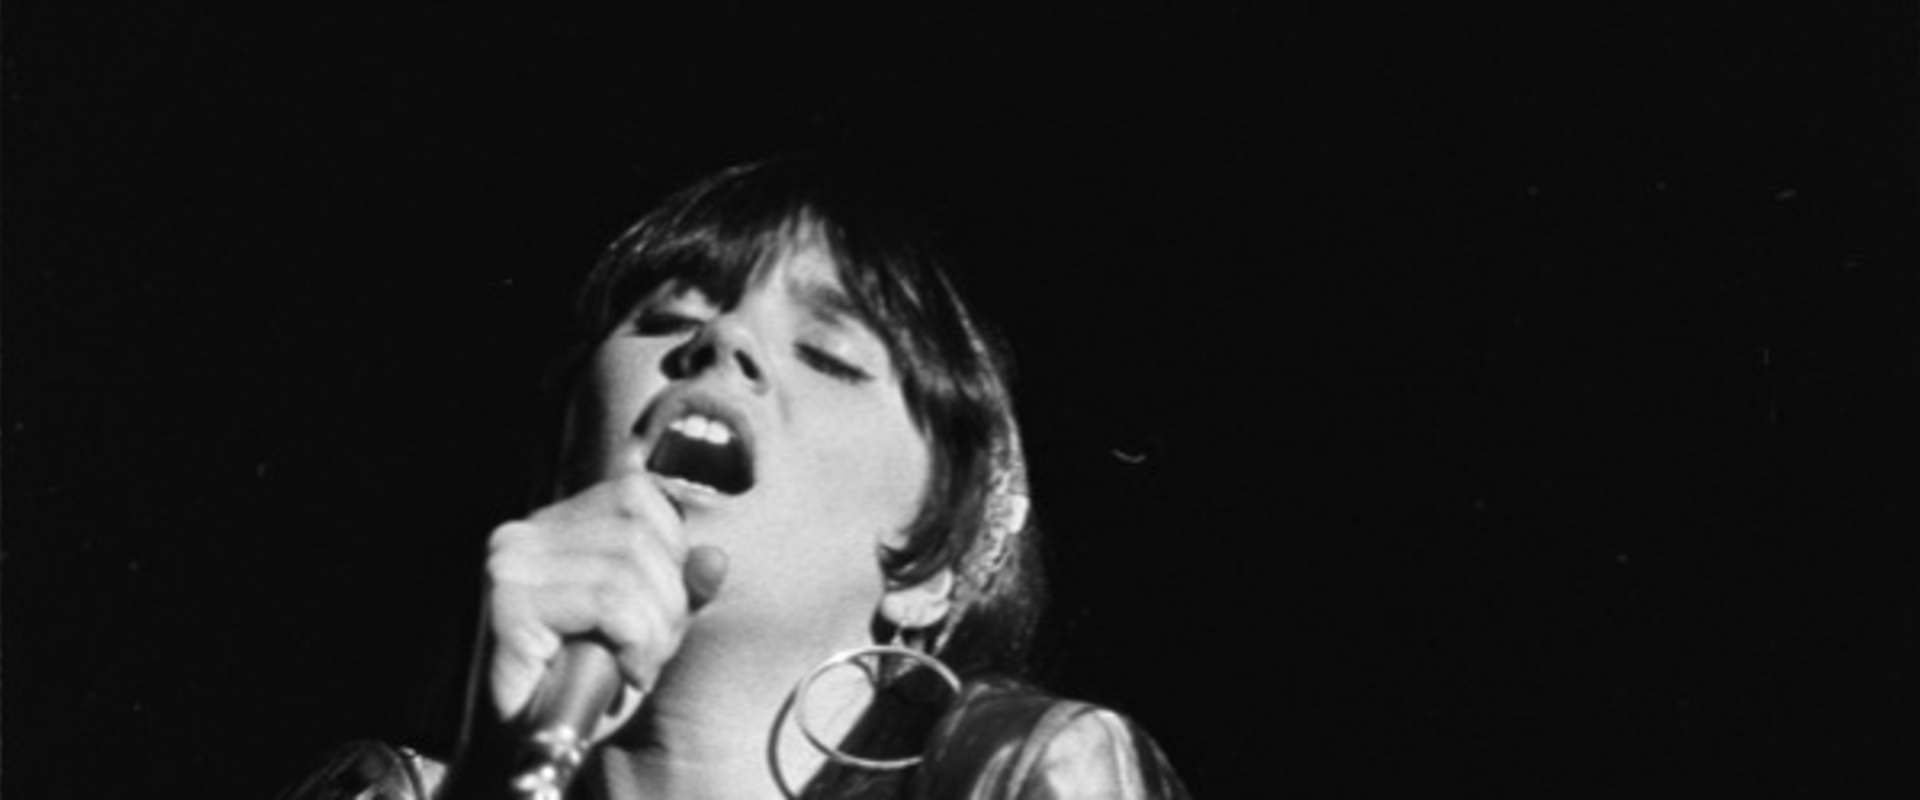 Linda Ronstadt: The Sound of My Voice background 2